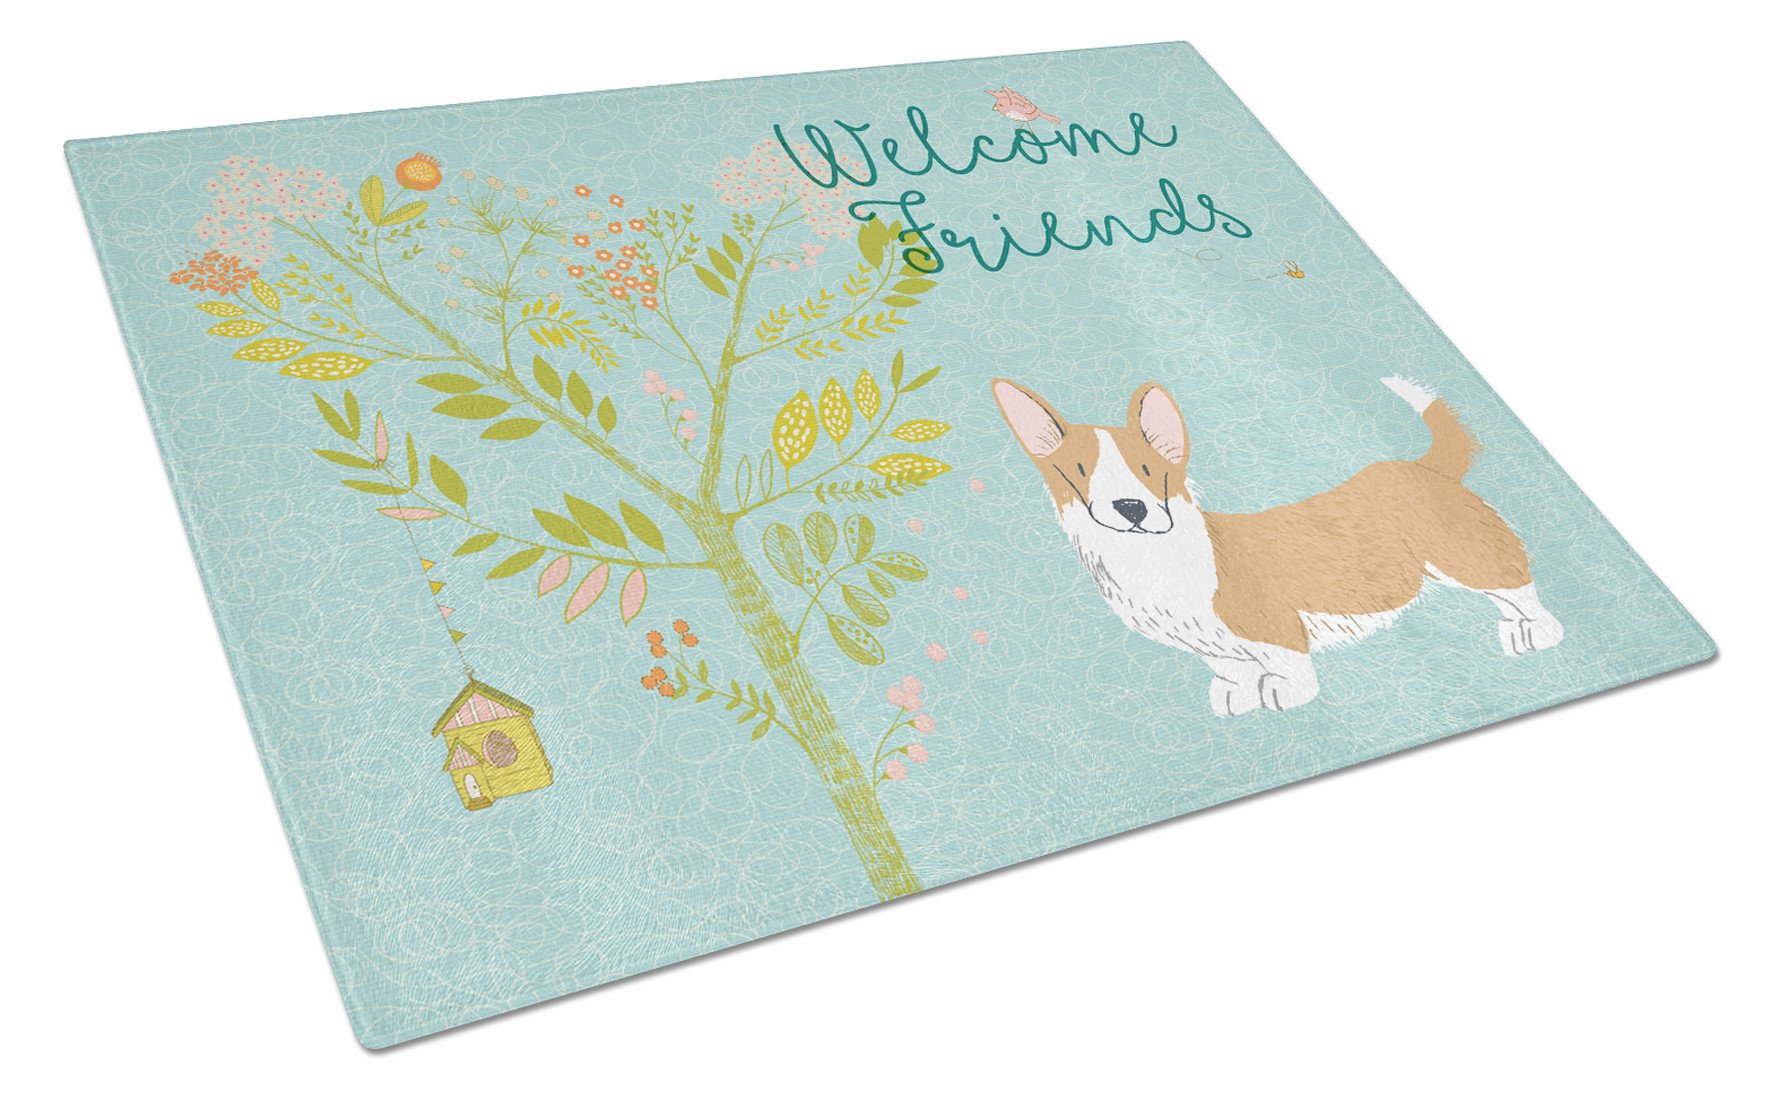 Welcome Friends Cardigan Welsh Corgi Tricolor Glass Cutting Board Large BB7611LCB by Caroline's Treasures